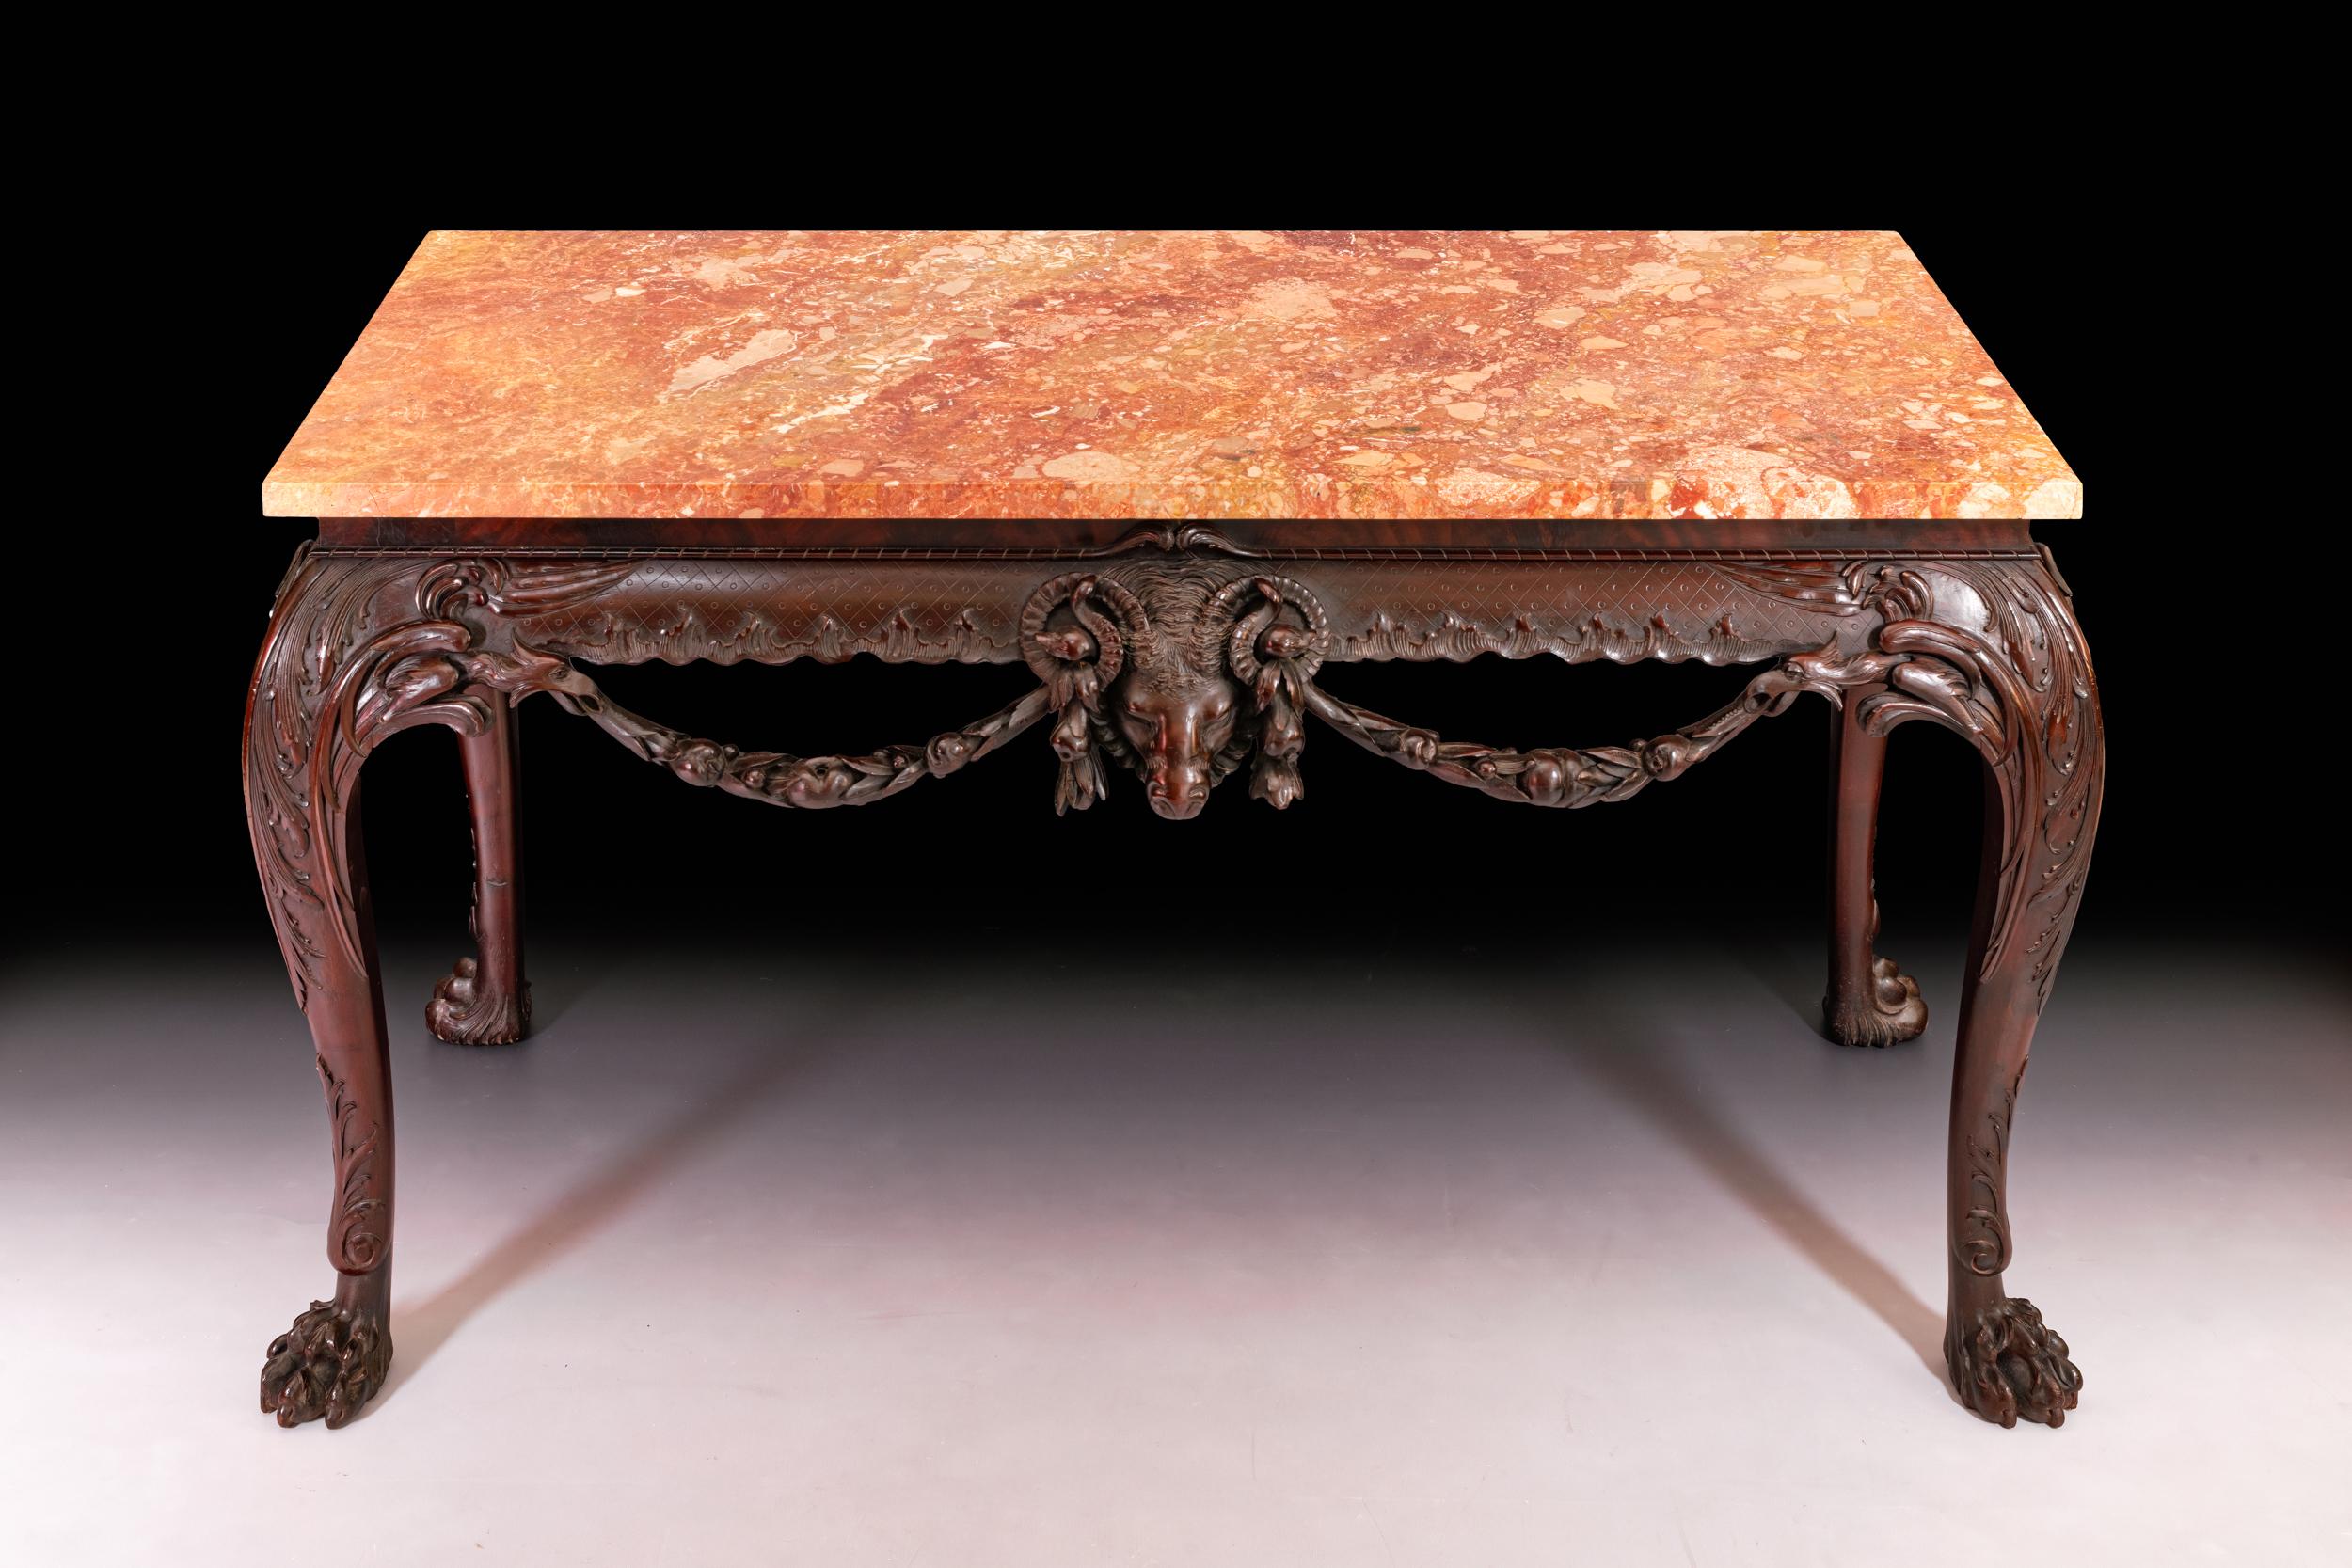 19th Century Irish Marble Top Console Table In the George III Style For Sale 5